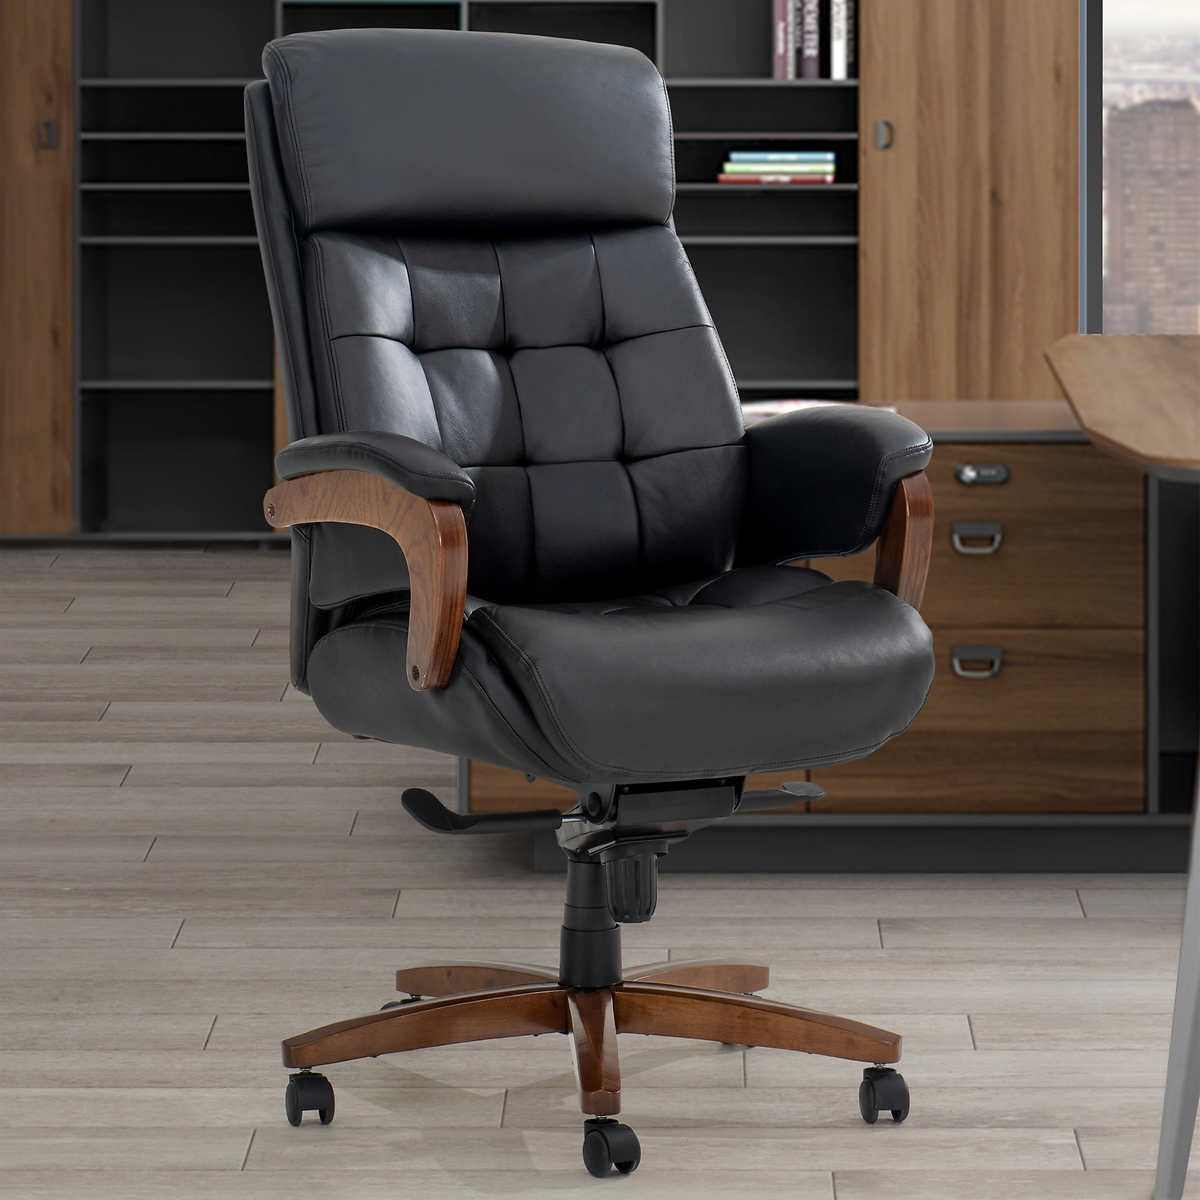 Tuscany Top Grain Leather High Back Executive Office Chair